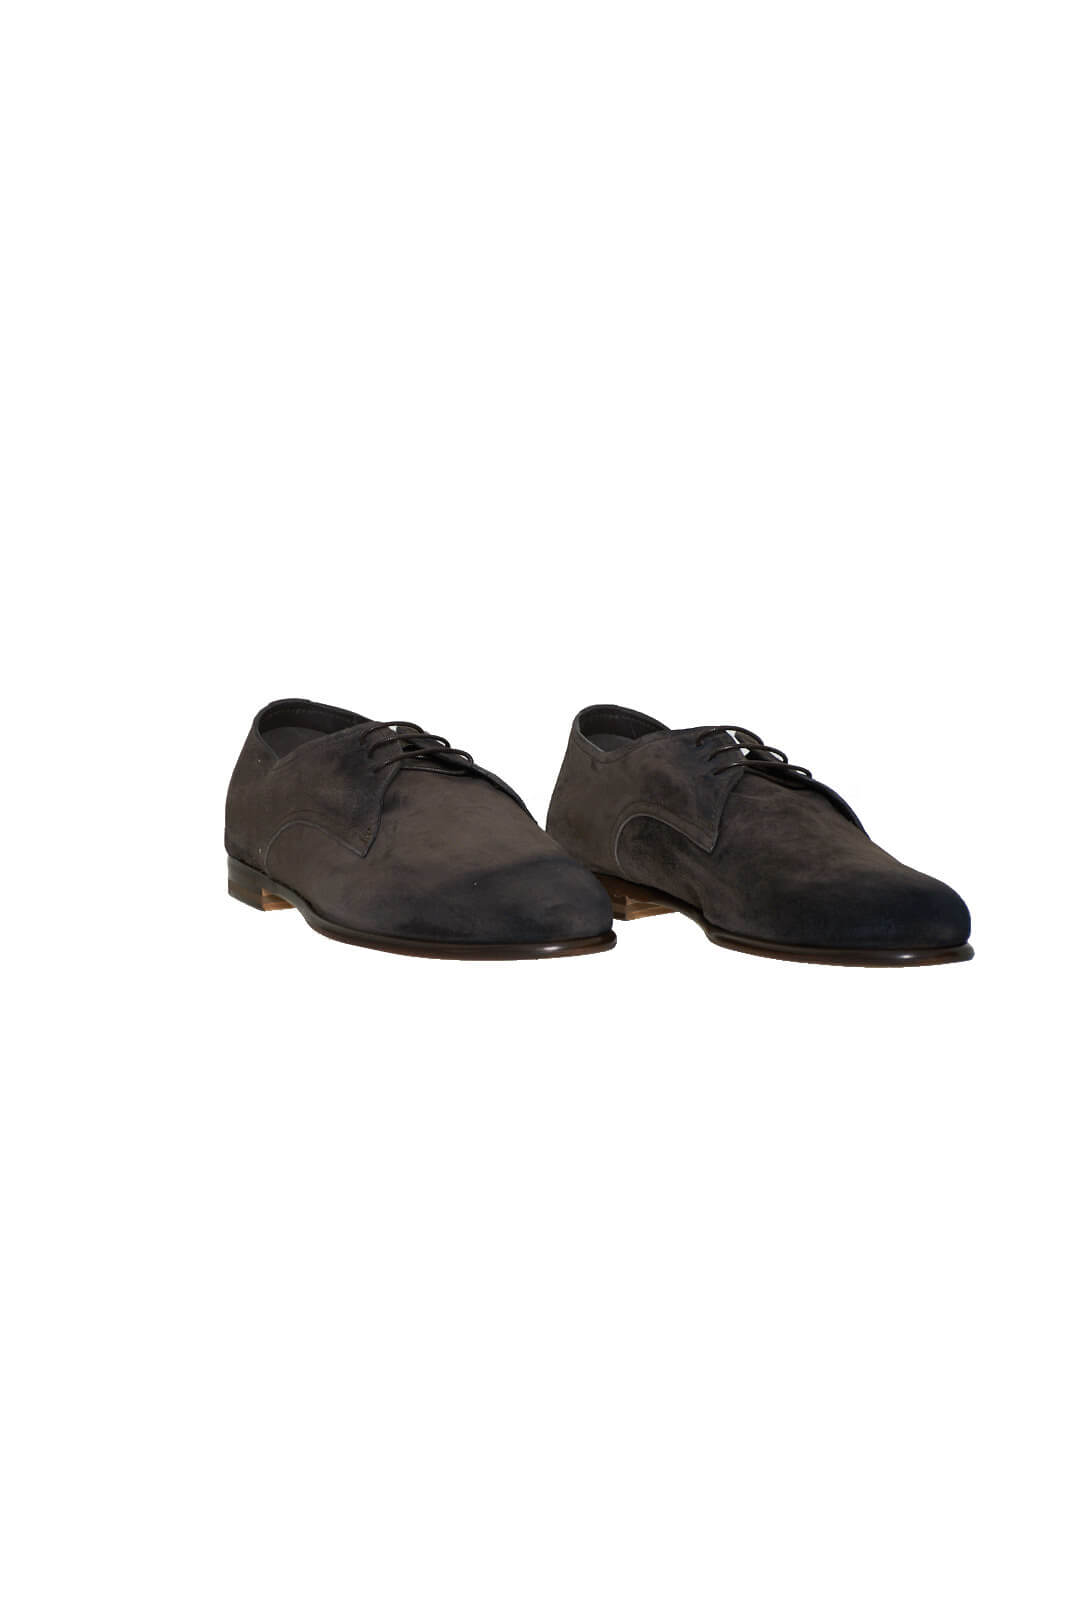 Fabi men's lace-up shoes in suede